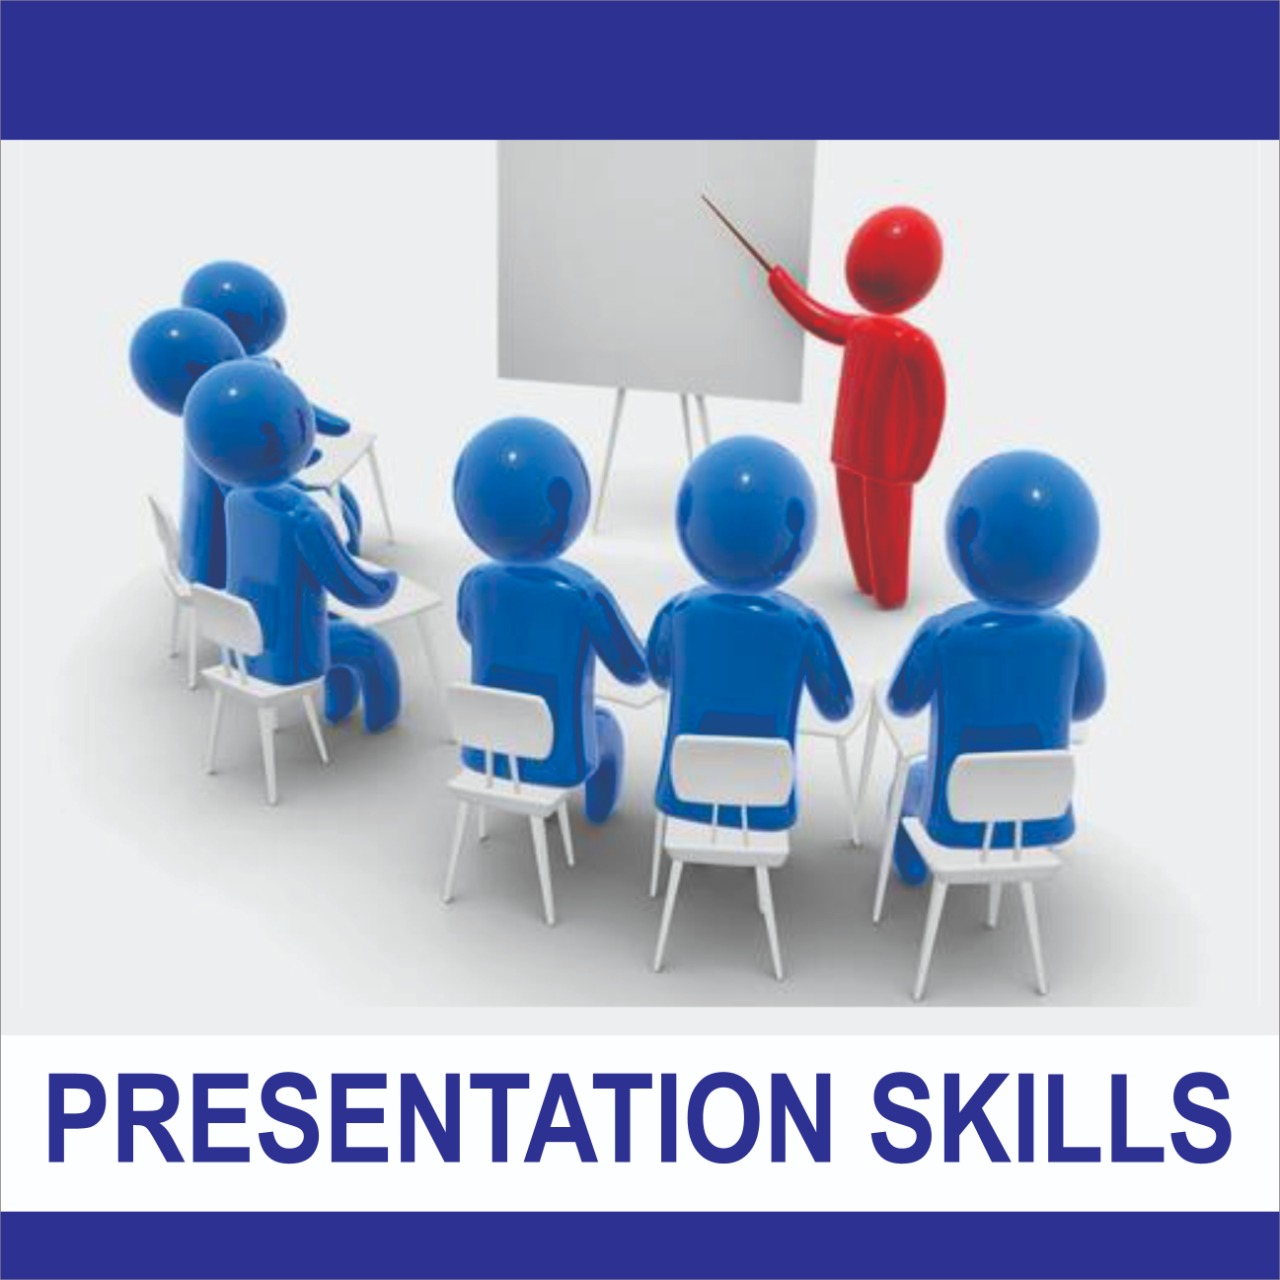 Learn how to make Power point presentation. Learn how to present your idea or your thoughts Learn public speaking, tone of voice, body language, creativity, and delivery. Learn detail about the functions of PPT Presentation like- PURPOSE, PLAN, PREPARE, PRESENT PROGRESS MODERN FOR PPT PRESENTATIONS